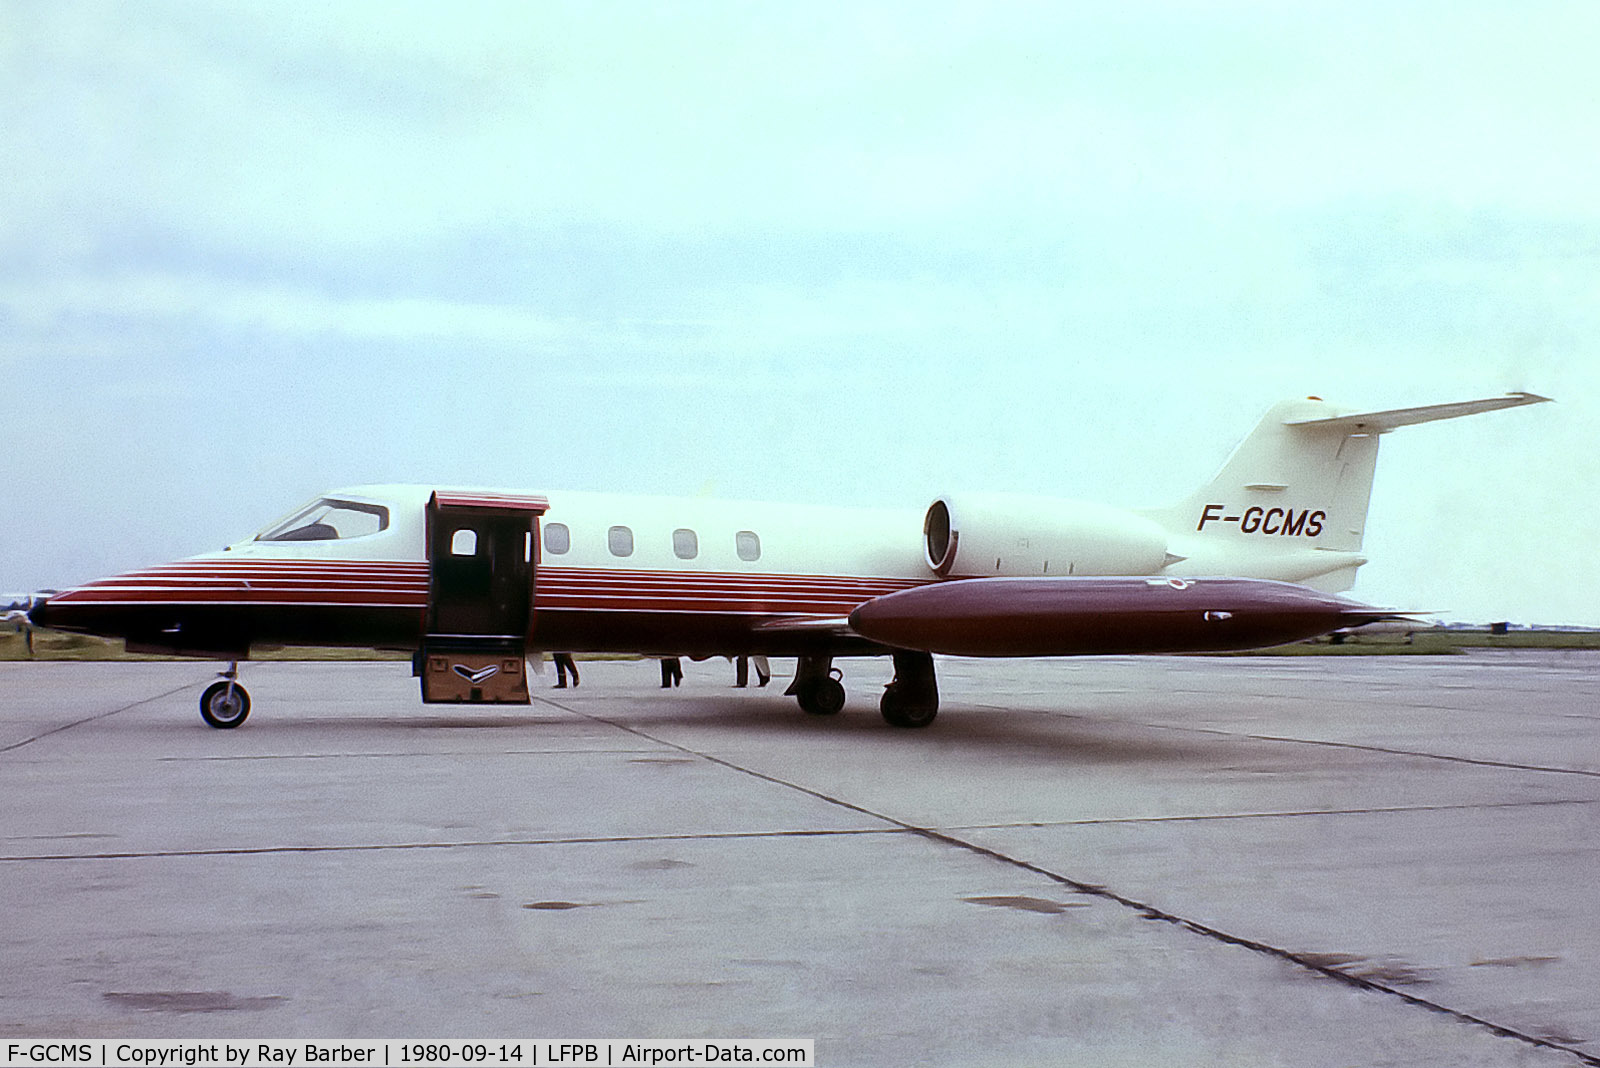 F-GCMS, 1979 Gates Learjet 35A C/N 257, Learjet 35A [35A-257] Paris-Le Bourget~F 14/09/1980. From a slide.